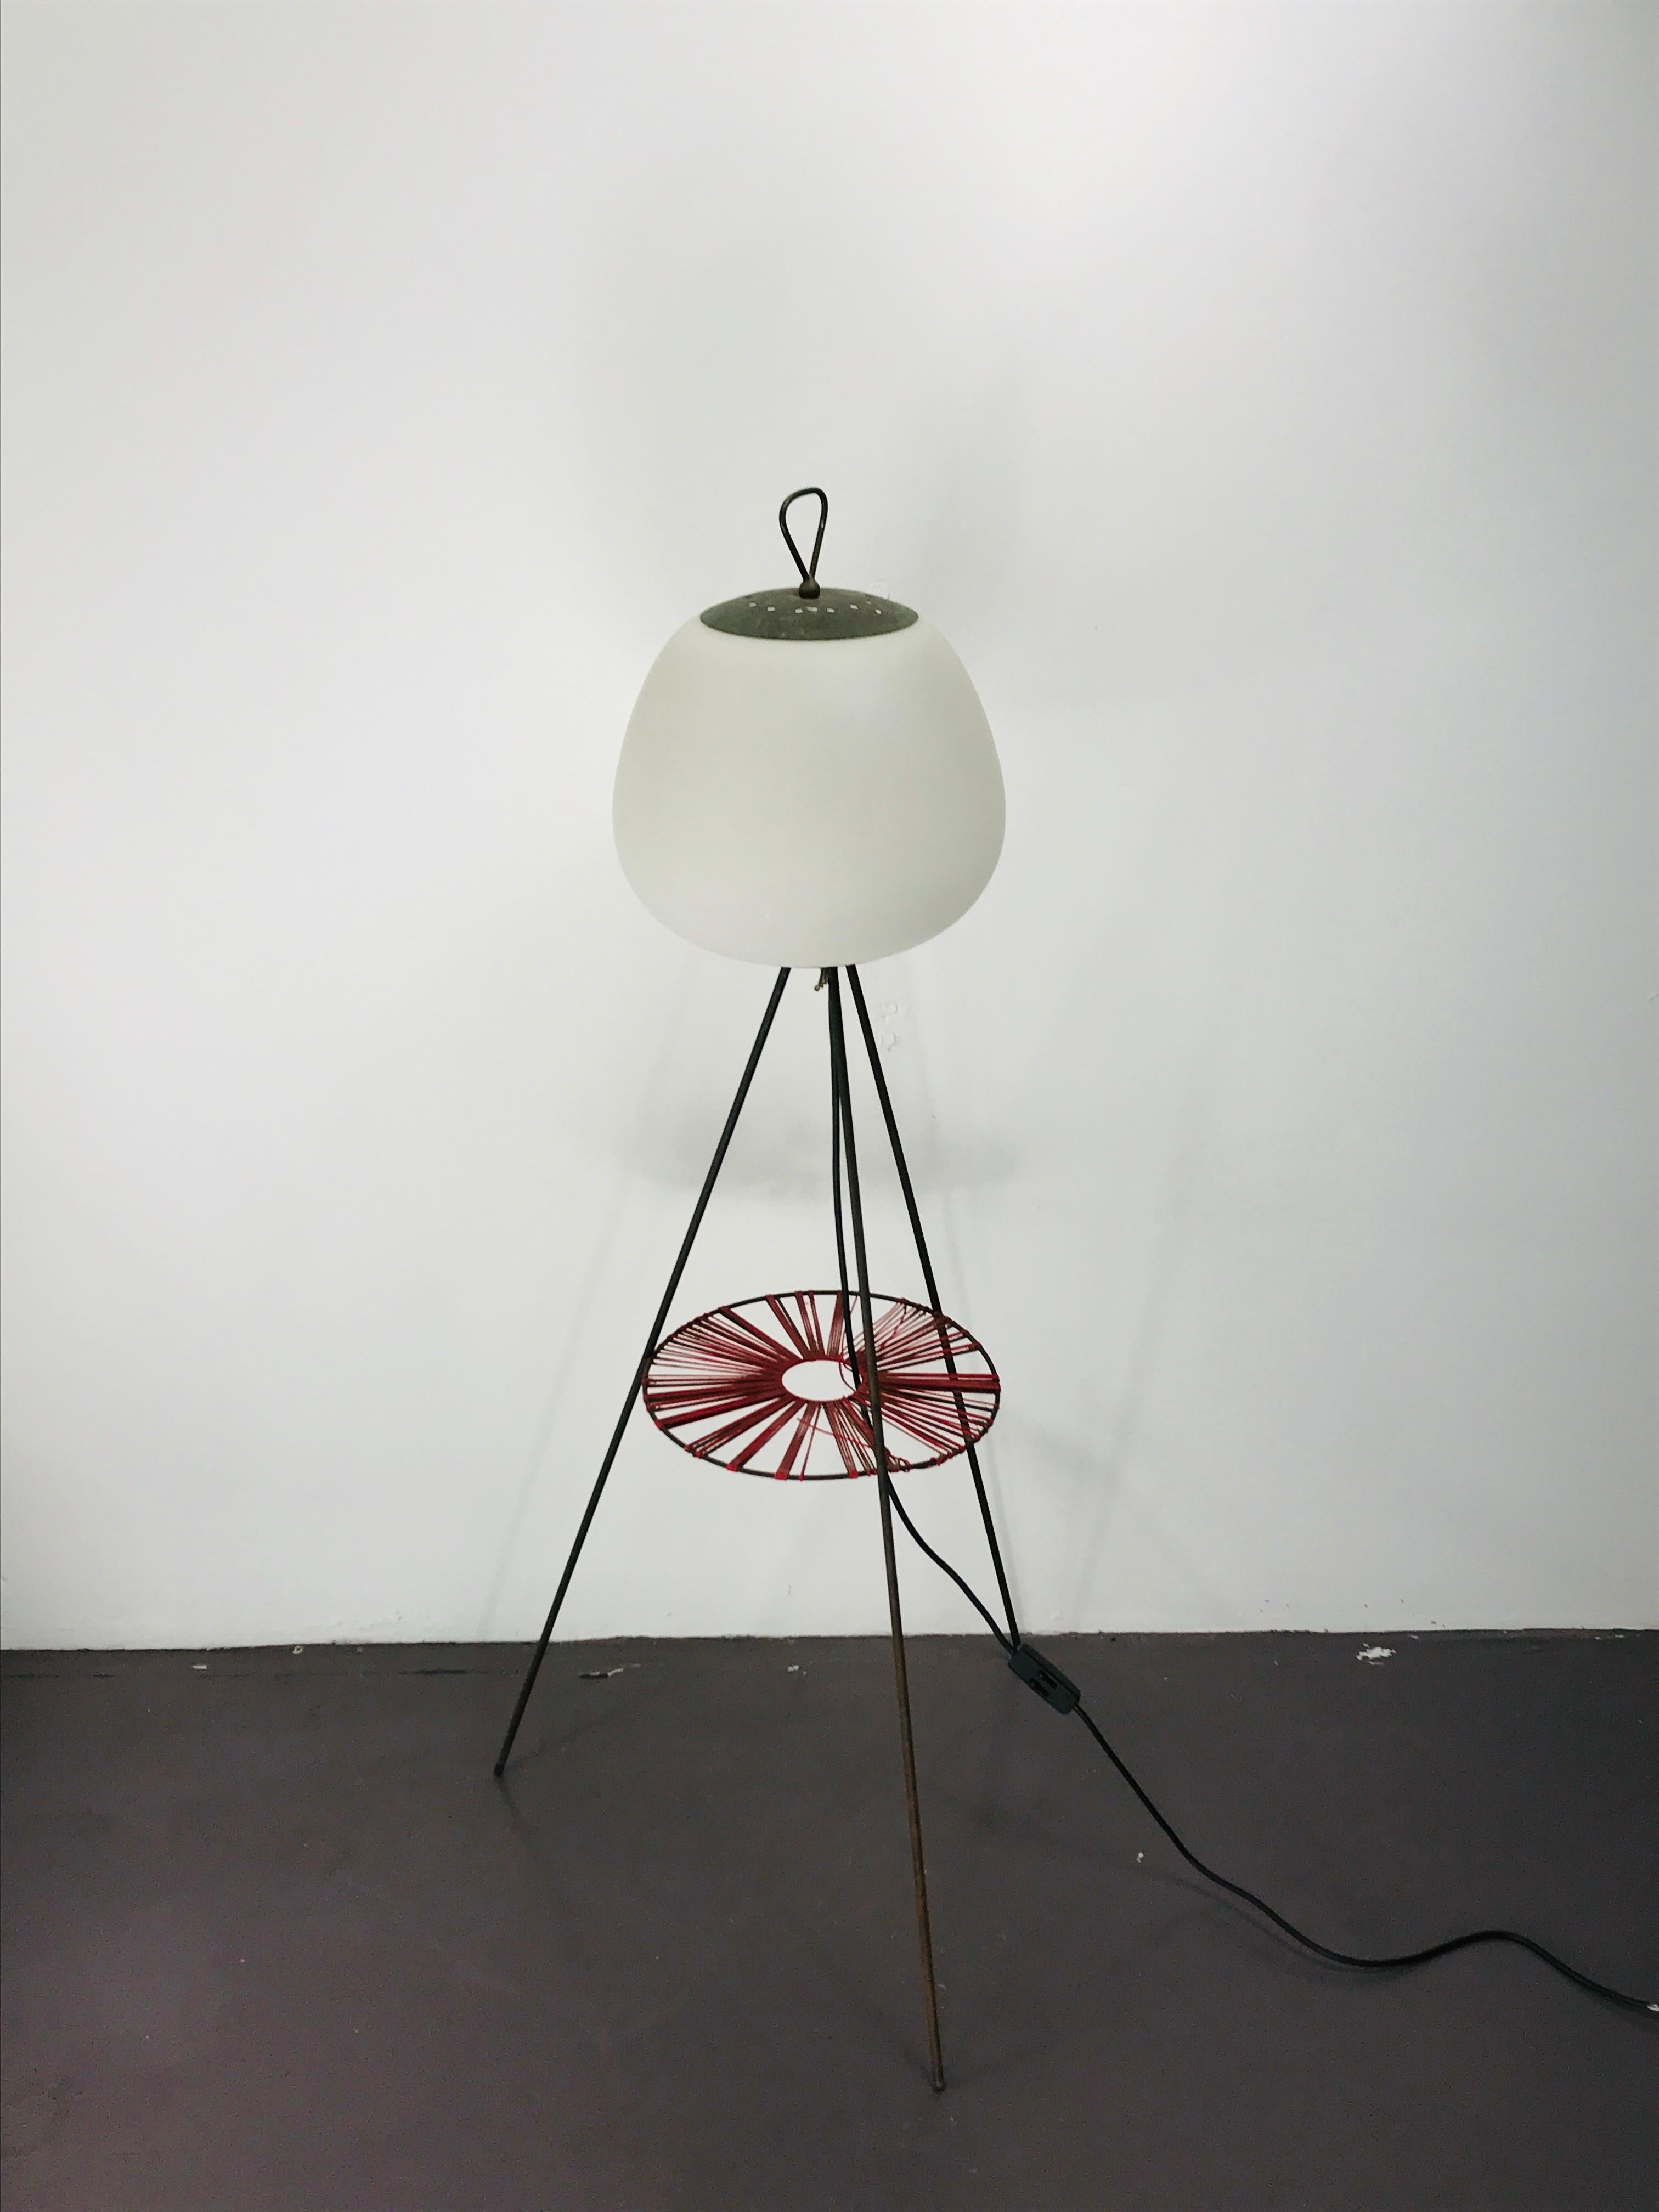 Midcentury Italian Floor Lamp in Glass and Metal Red and Blue Light, 1950 For Sale 6